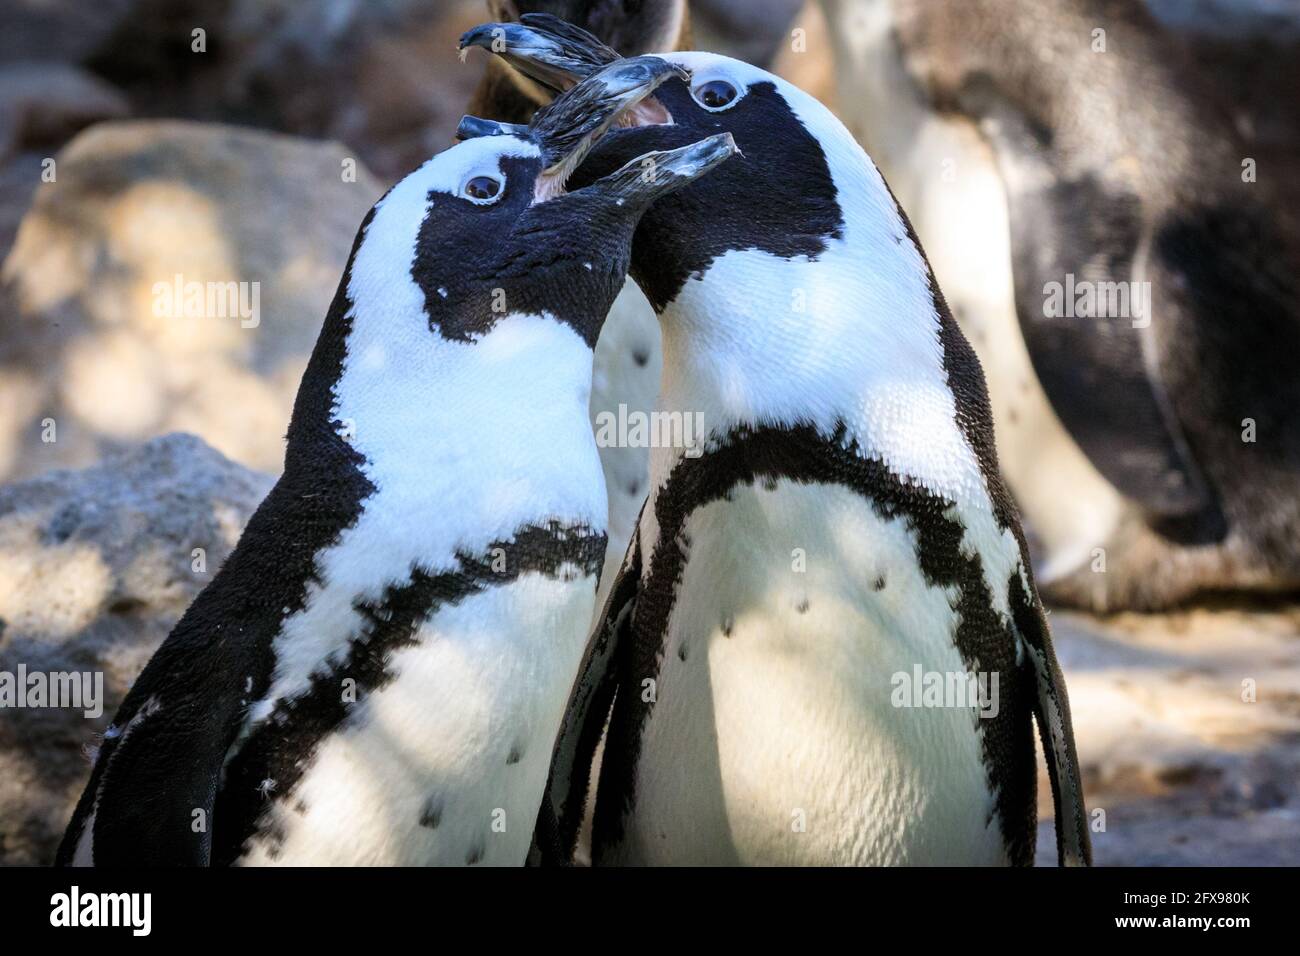 Two African penguins (Spheniscus demersus), also known as the Cape penguin or South African penguin, courting Stock Photo